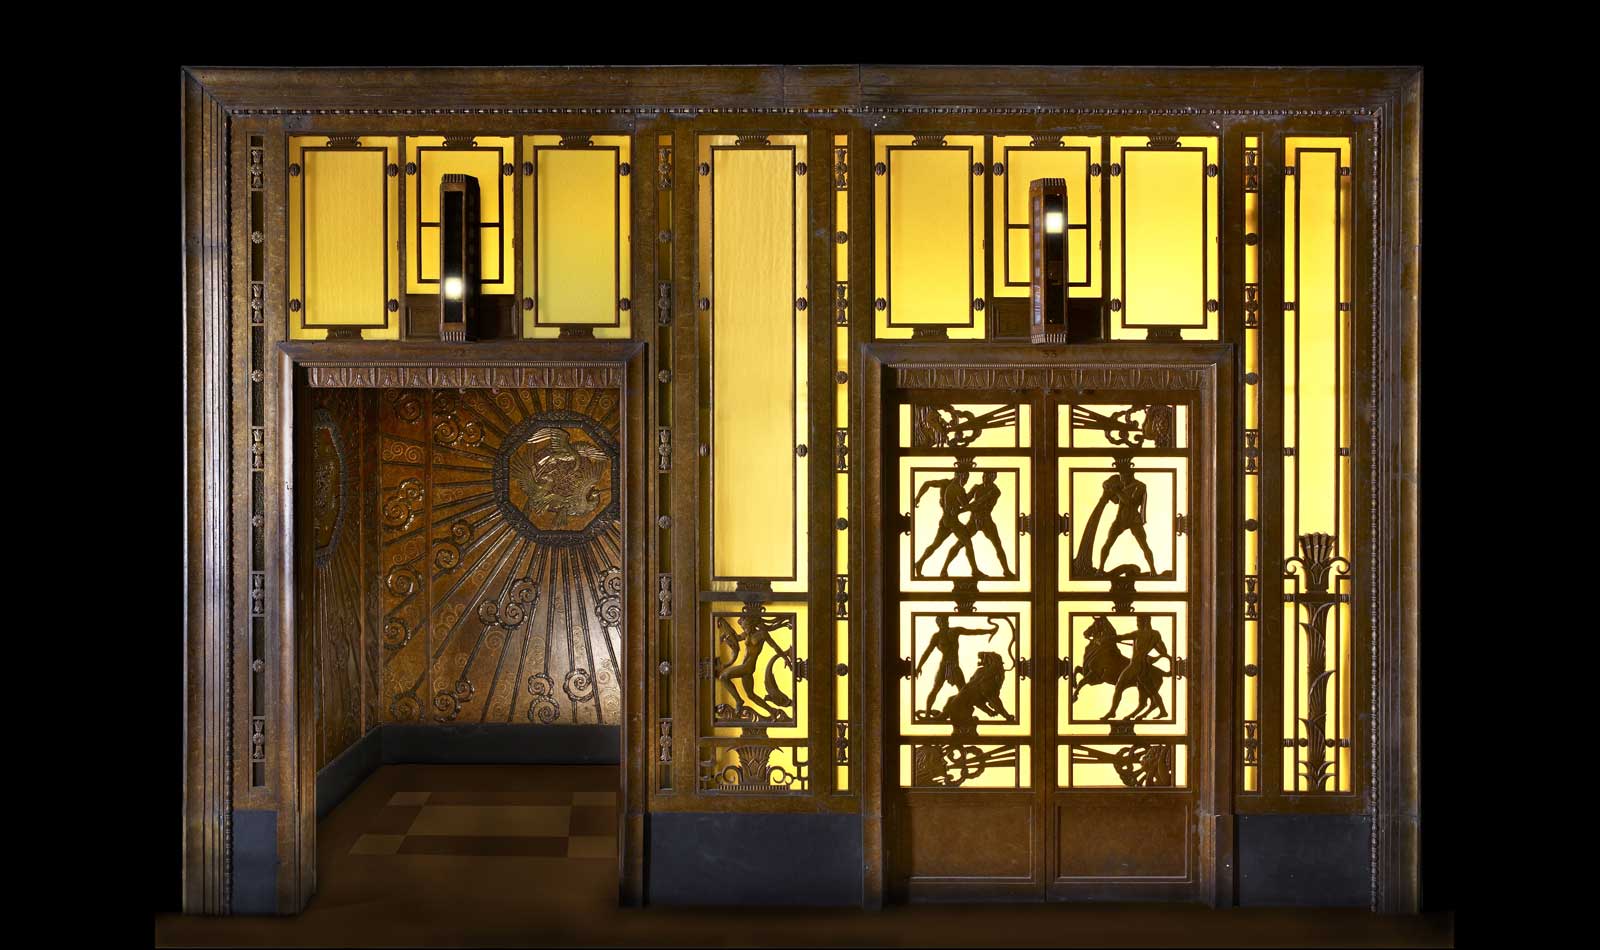 Selfridges lift in the People's city gallery.